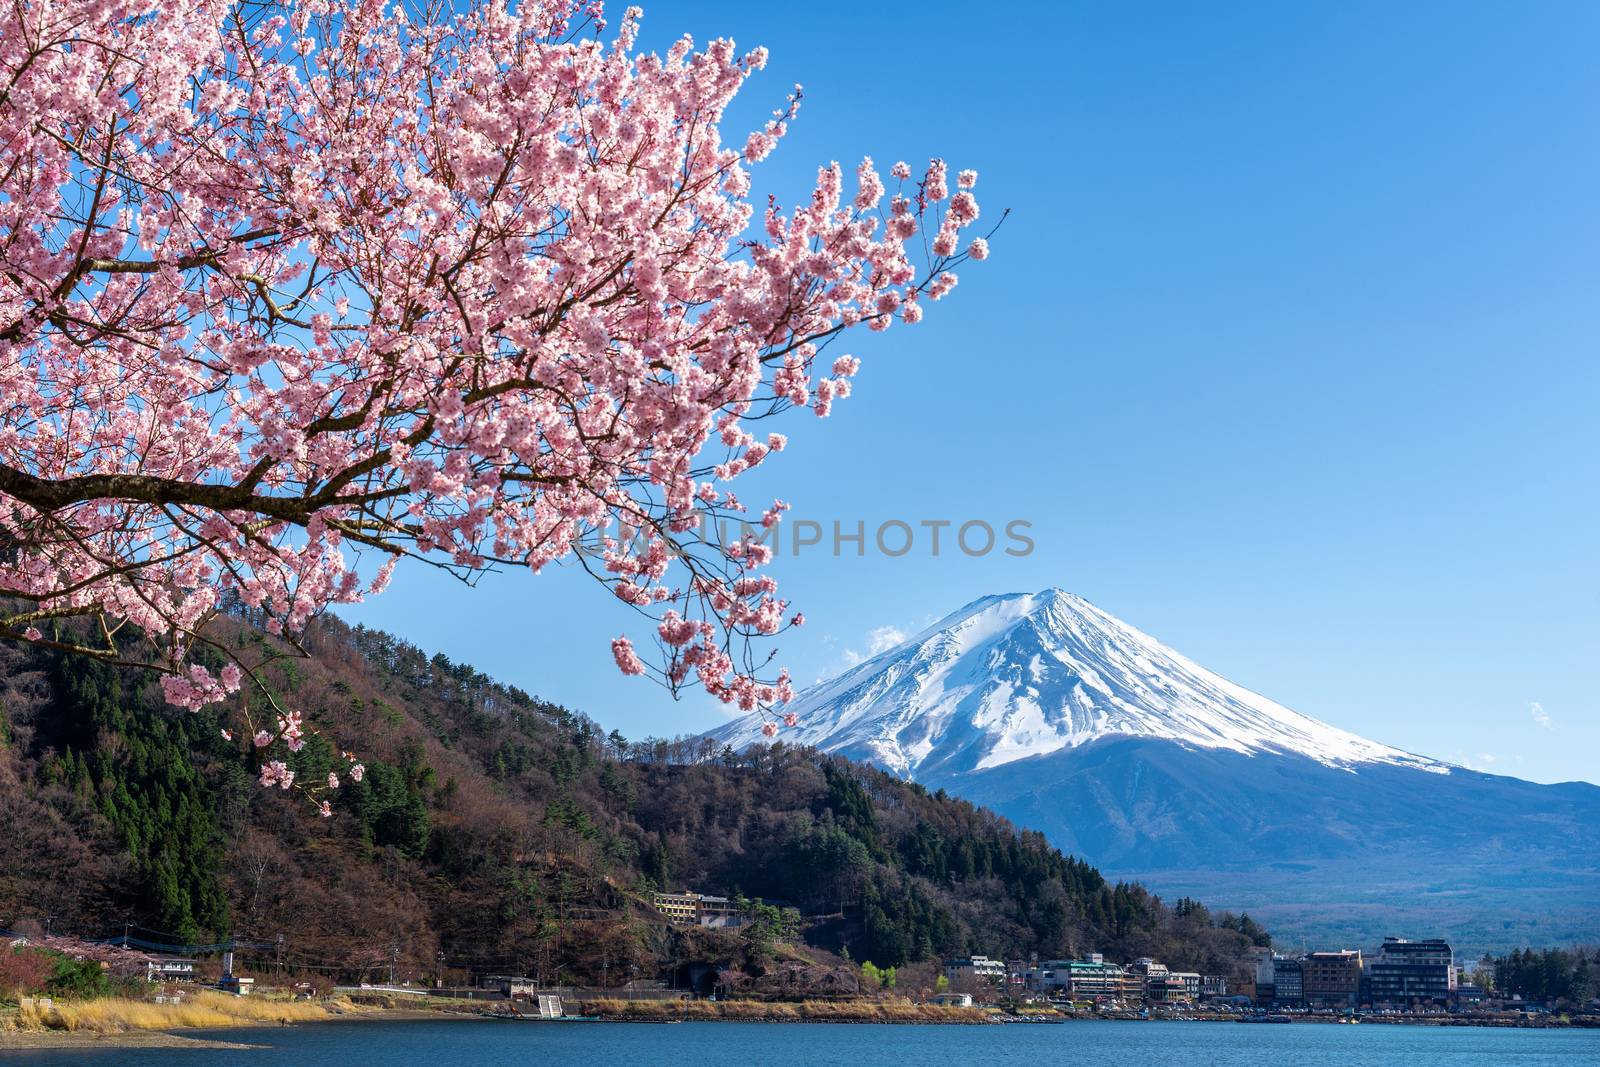 Fuji mountain and cherry blossoms in spring, Japan. by gutarphotoghaphy